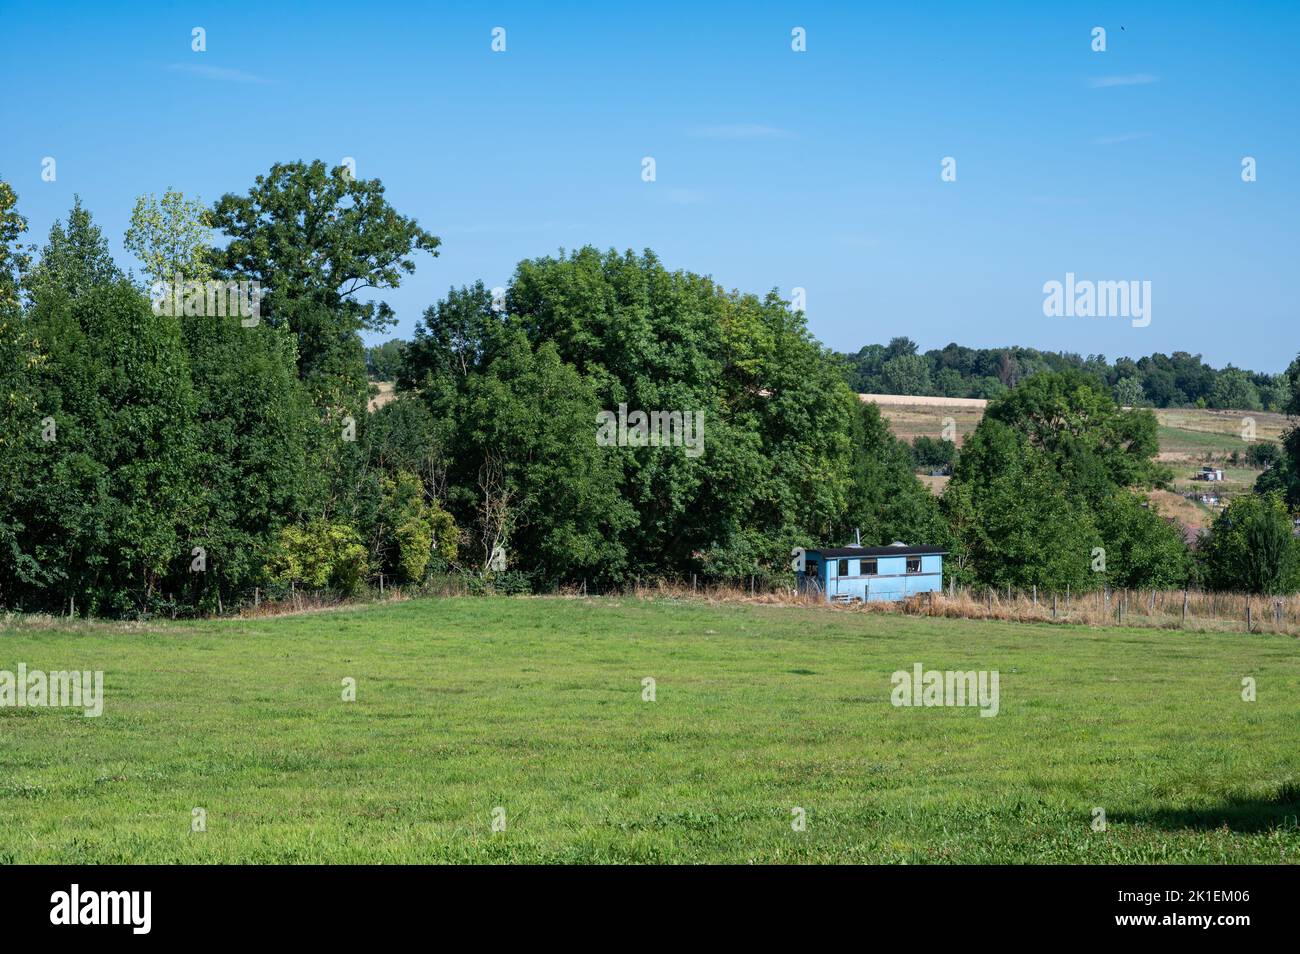 Agriculture fields and trees against blue sky, Hoegaarden, Belgium Stock Photo